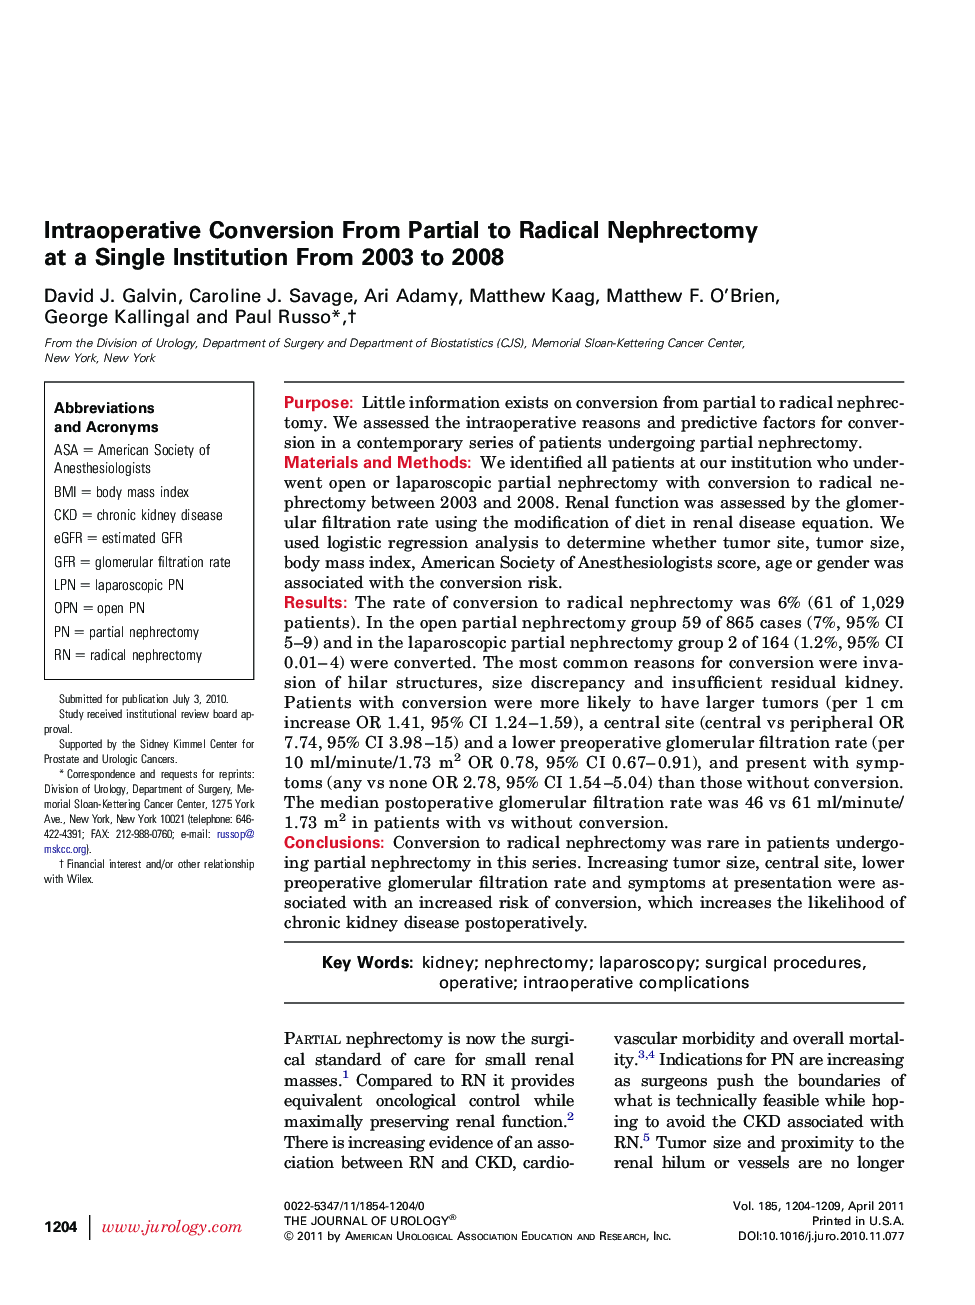 Intraoperative Conversion From Partial to Radical Nephrectomy at a Single Institution From 2003 to 2008